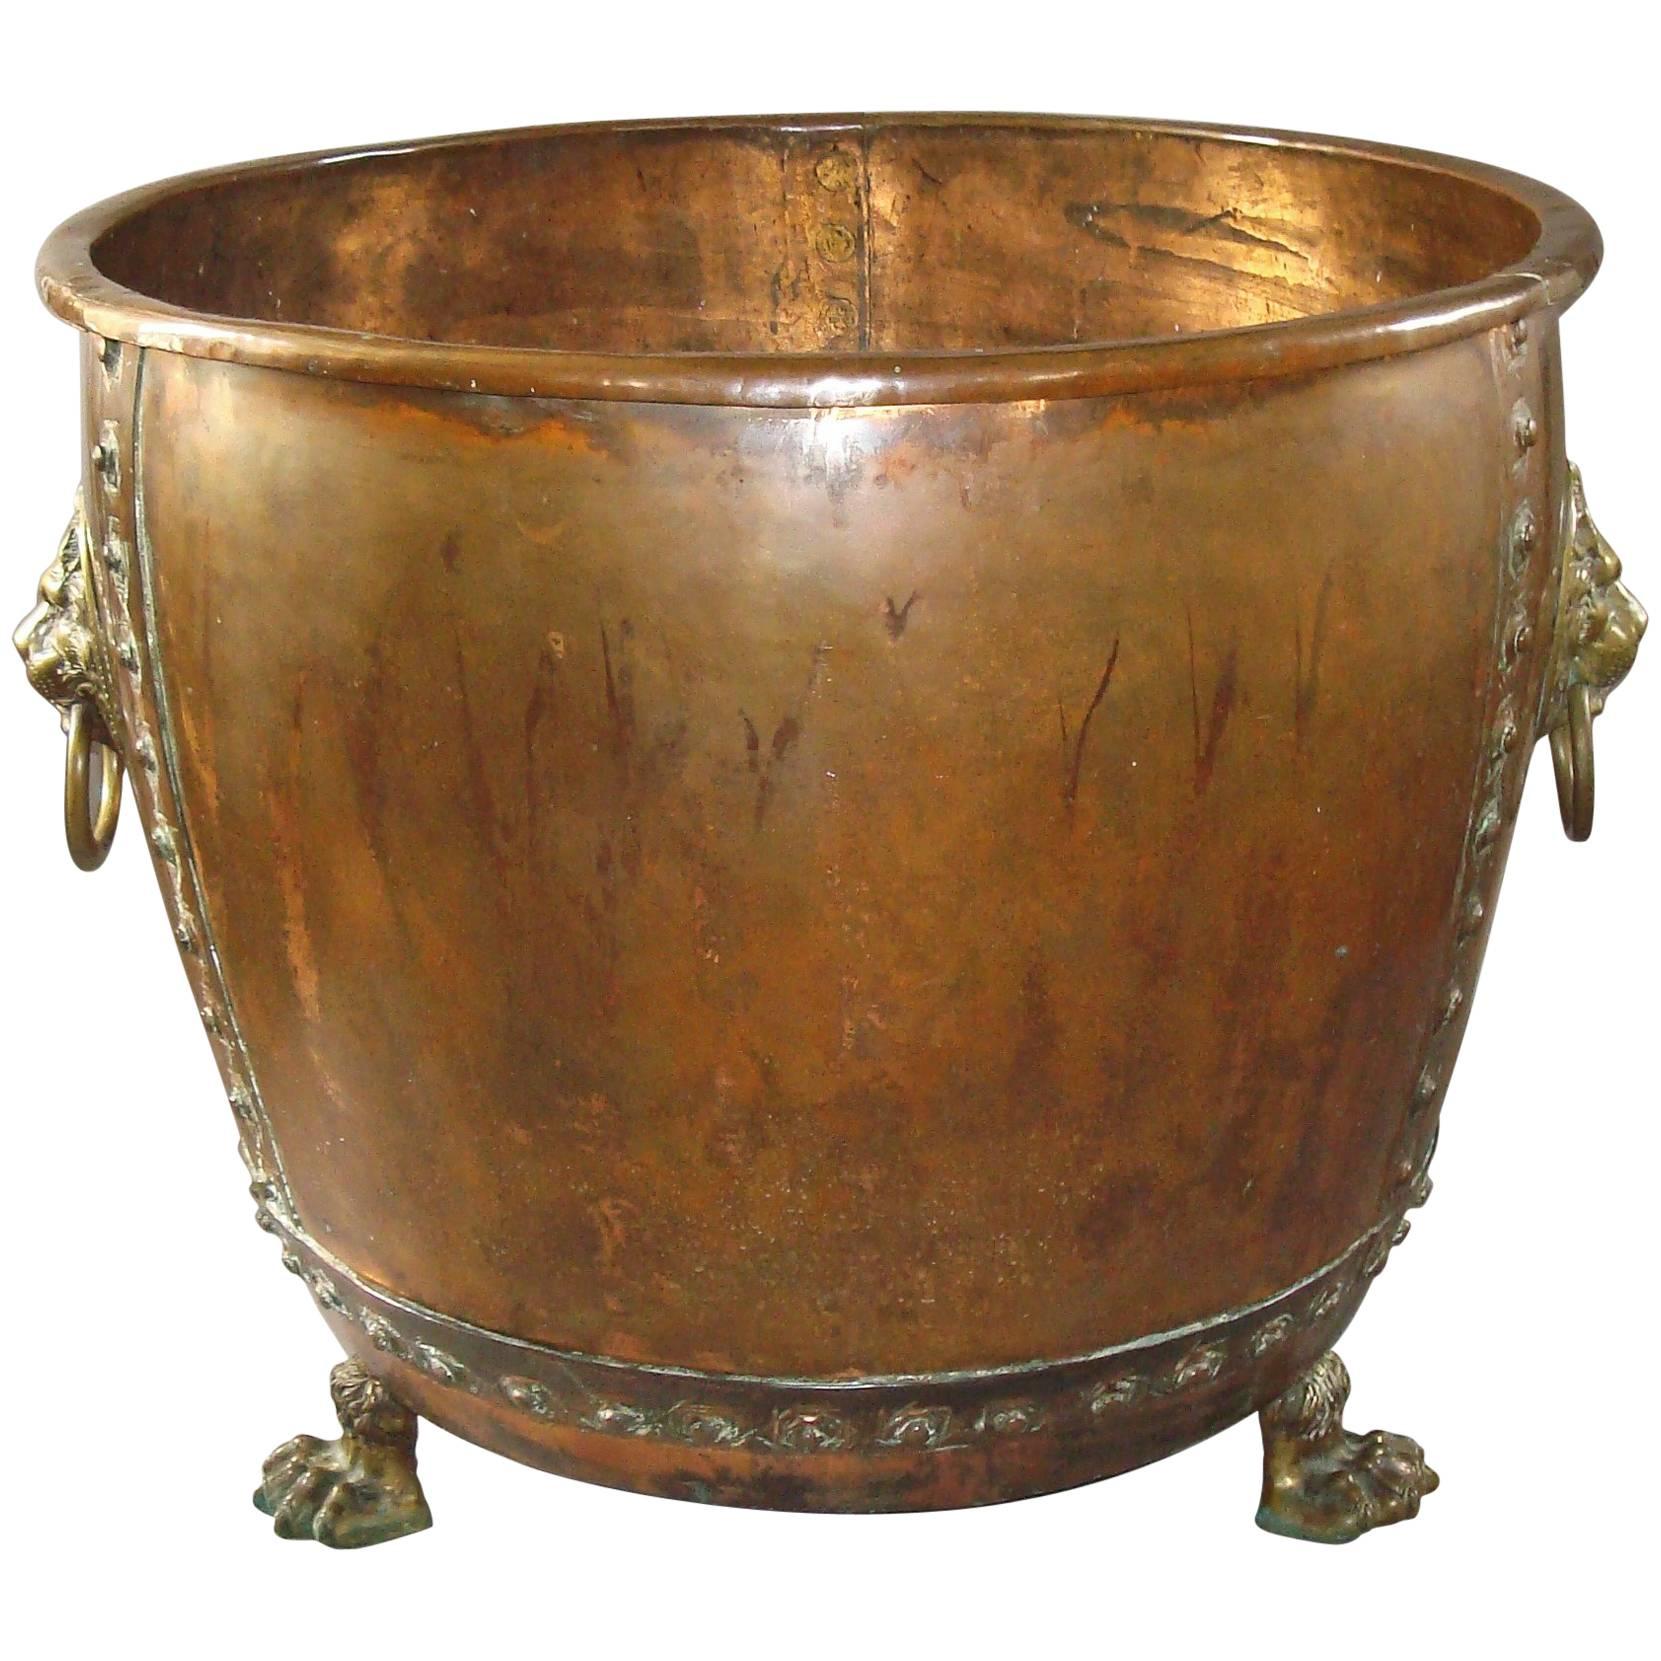 Monumental 19th Century Copper Log Holder or Jardiniere For Sale